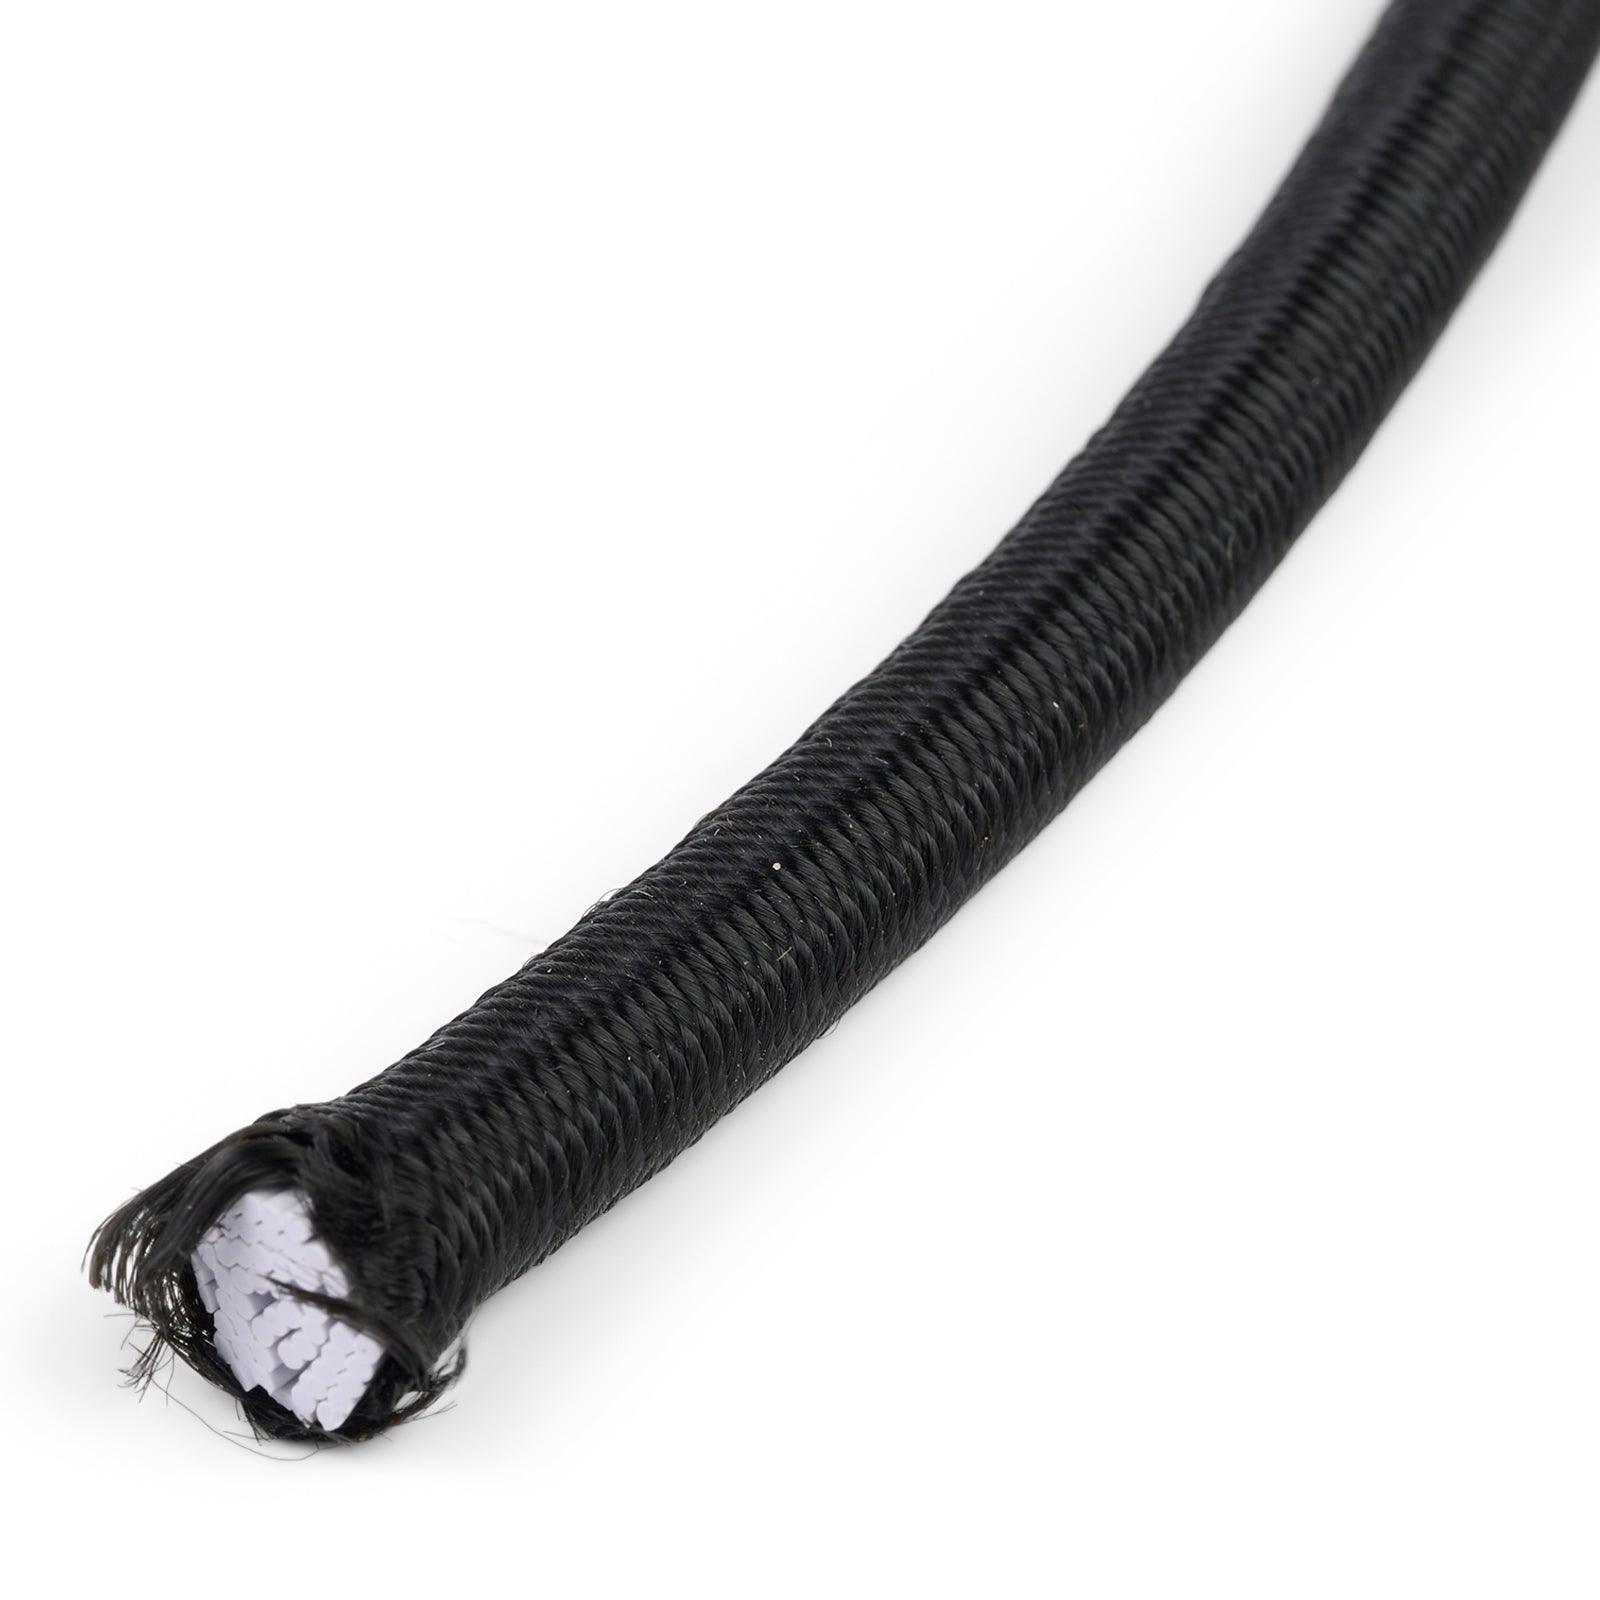 Elastic bungee cord with loop That Are Strong and Flexible 